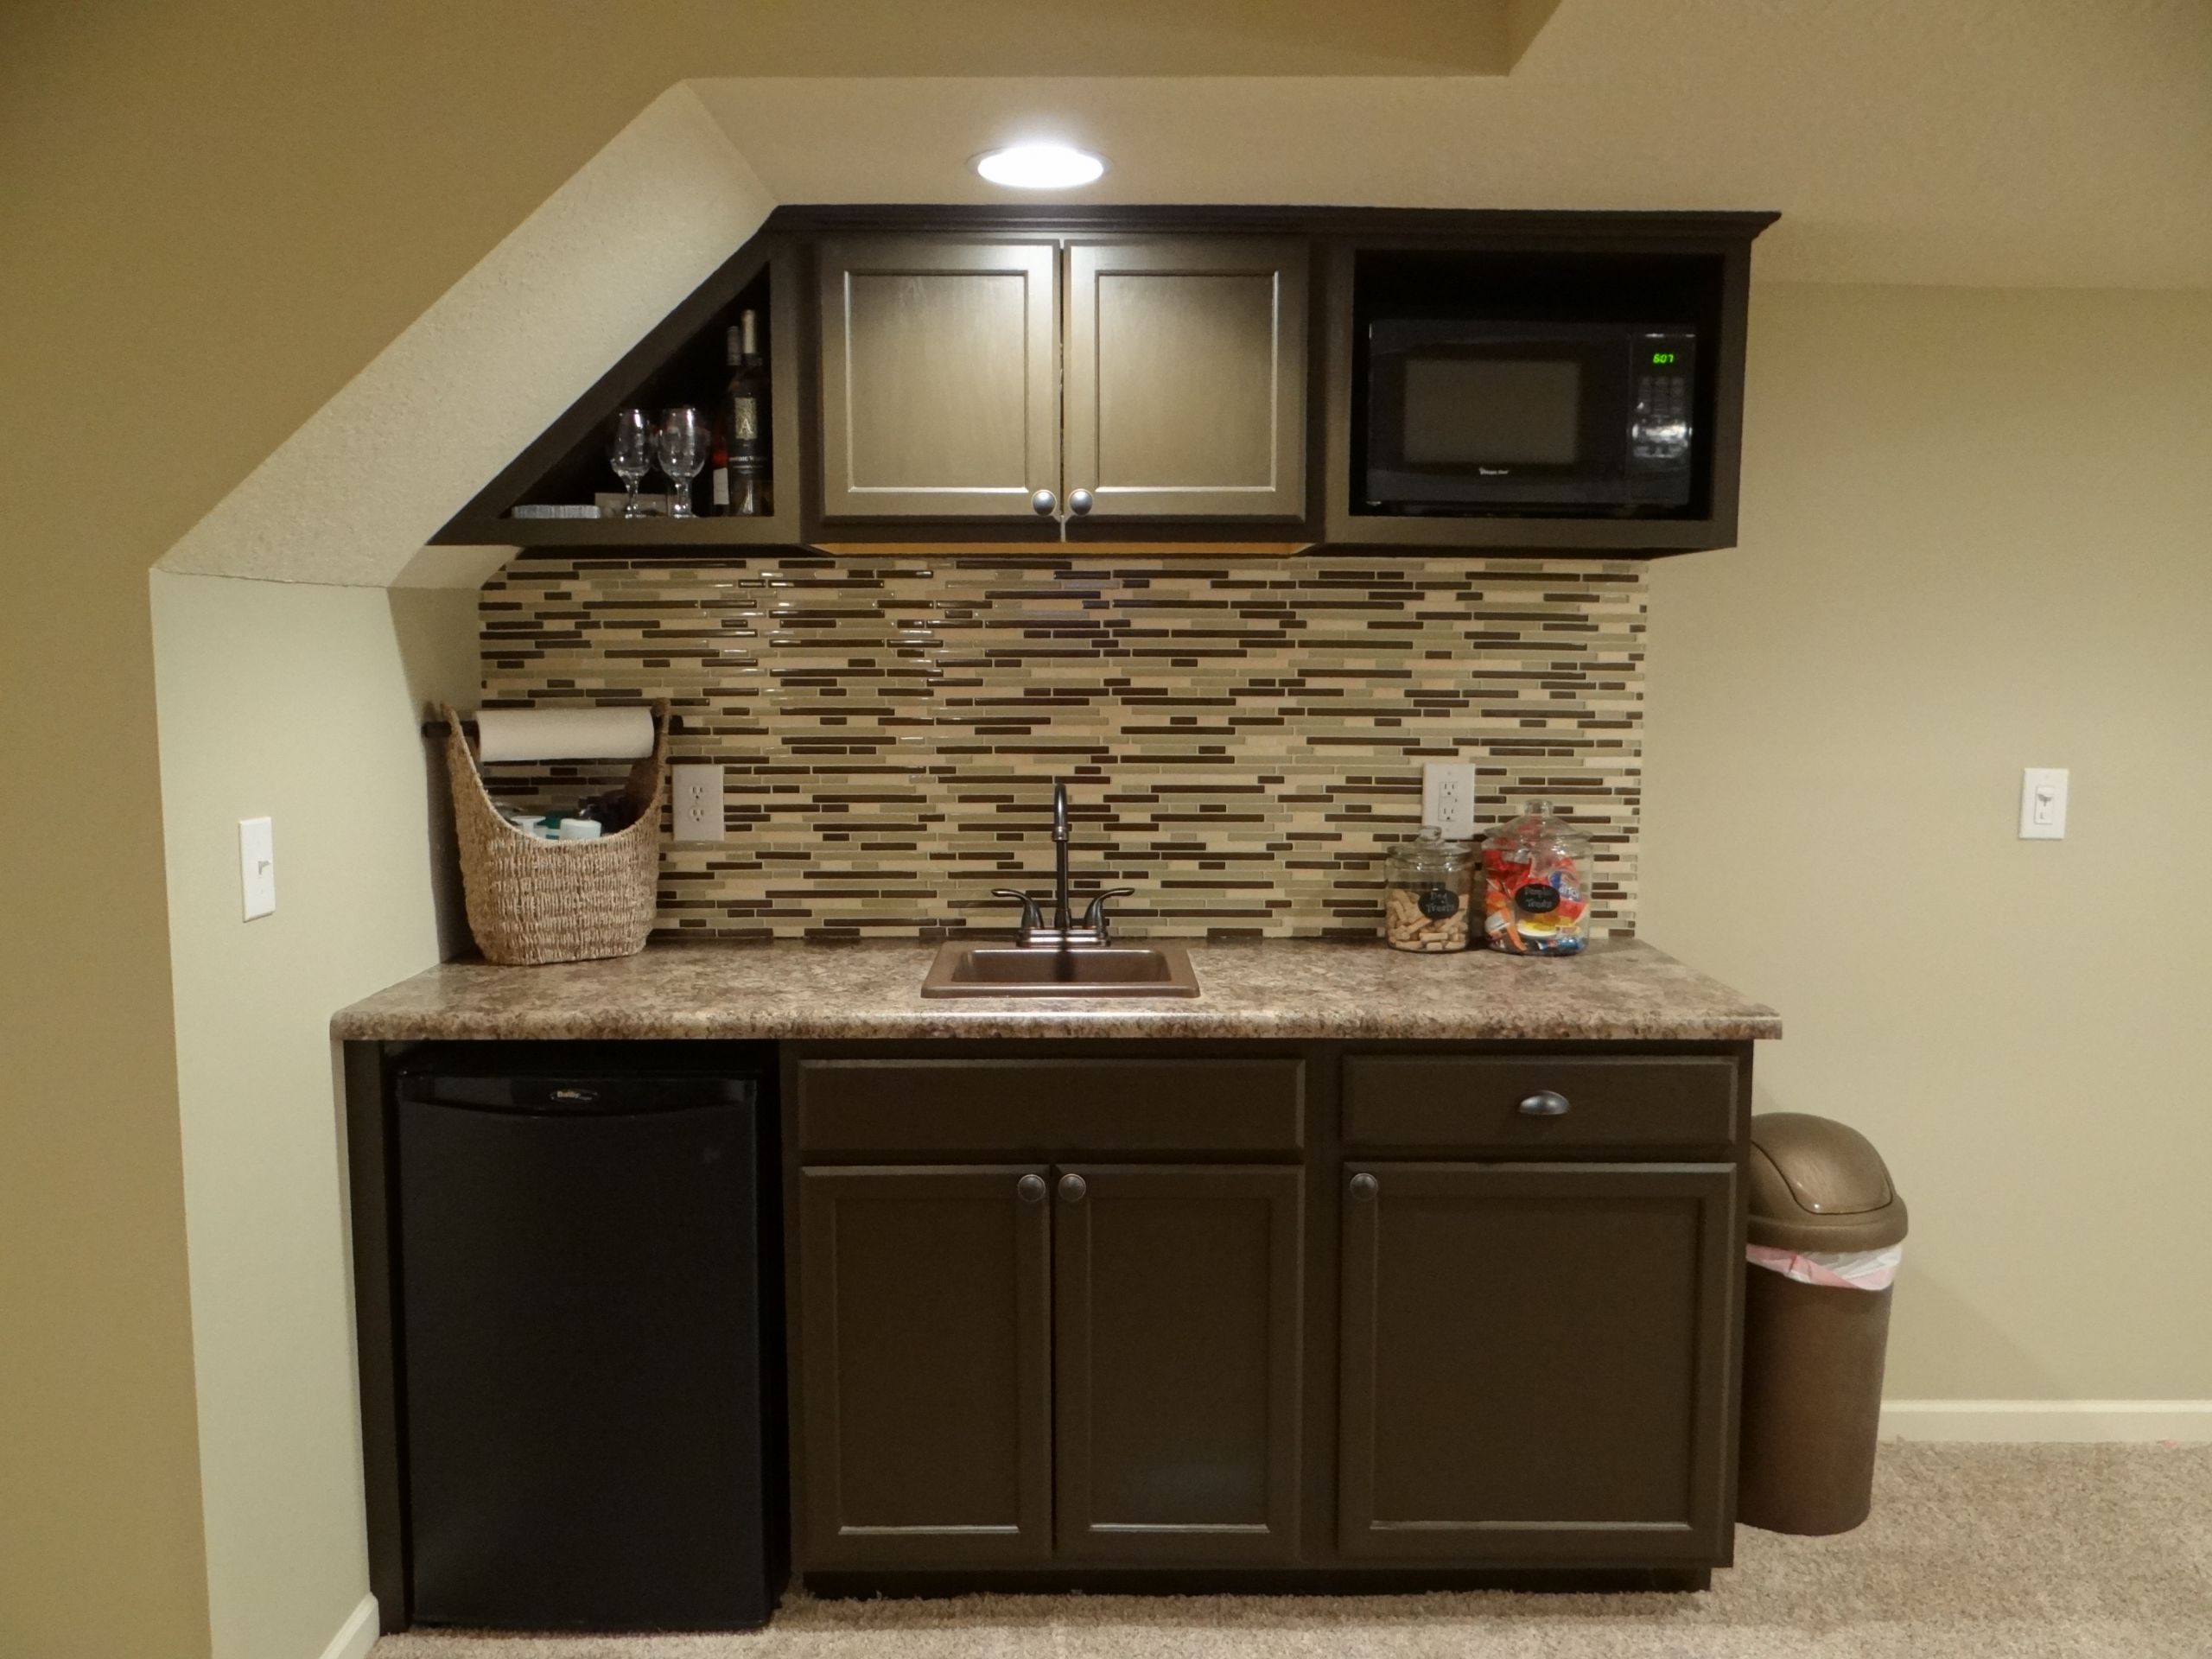 Lowes Kitchen Wall Cabinets
 Inspirations Outstanding Kitchen Interior With Best Lowes